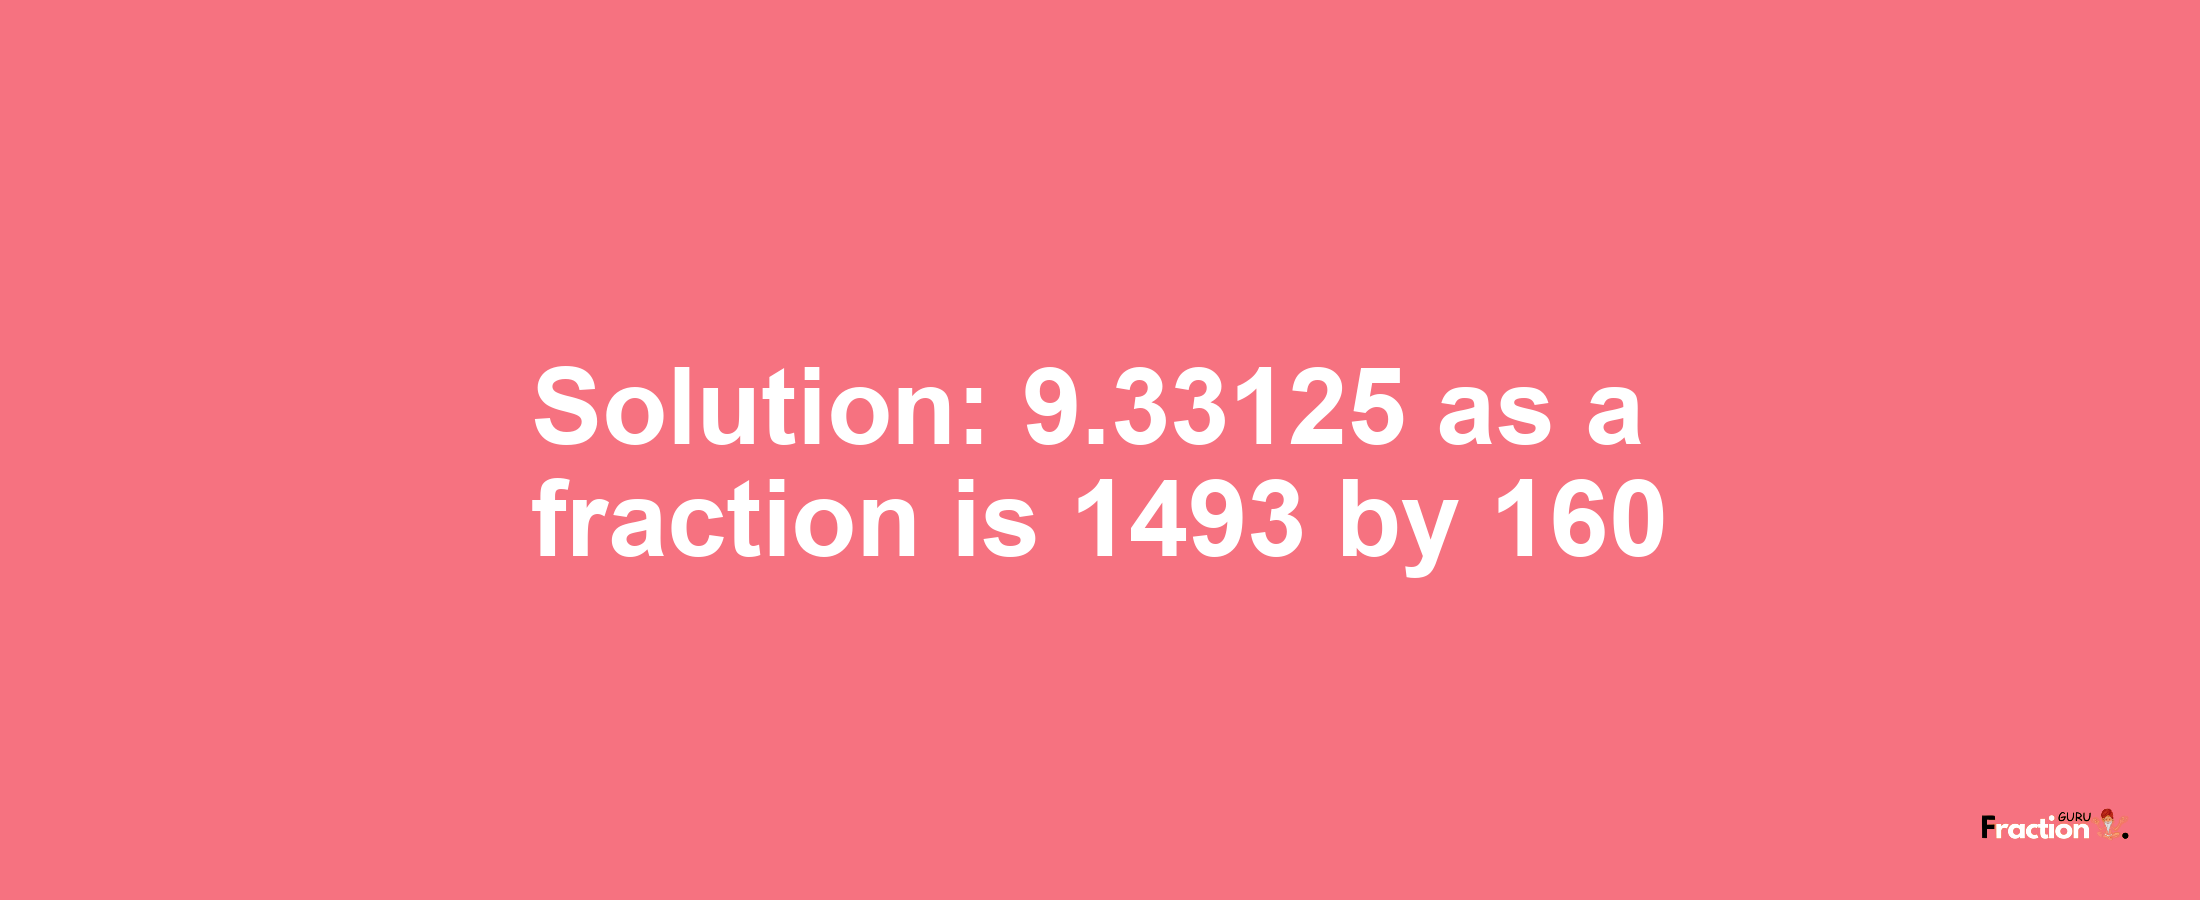 Solution:9.33125 as a fraction is 1493/160